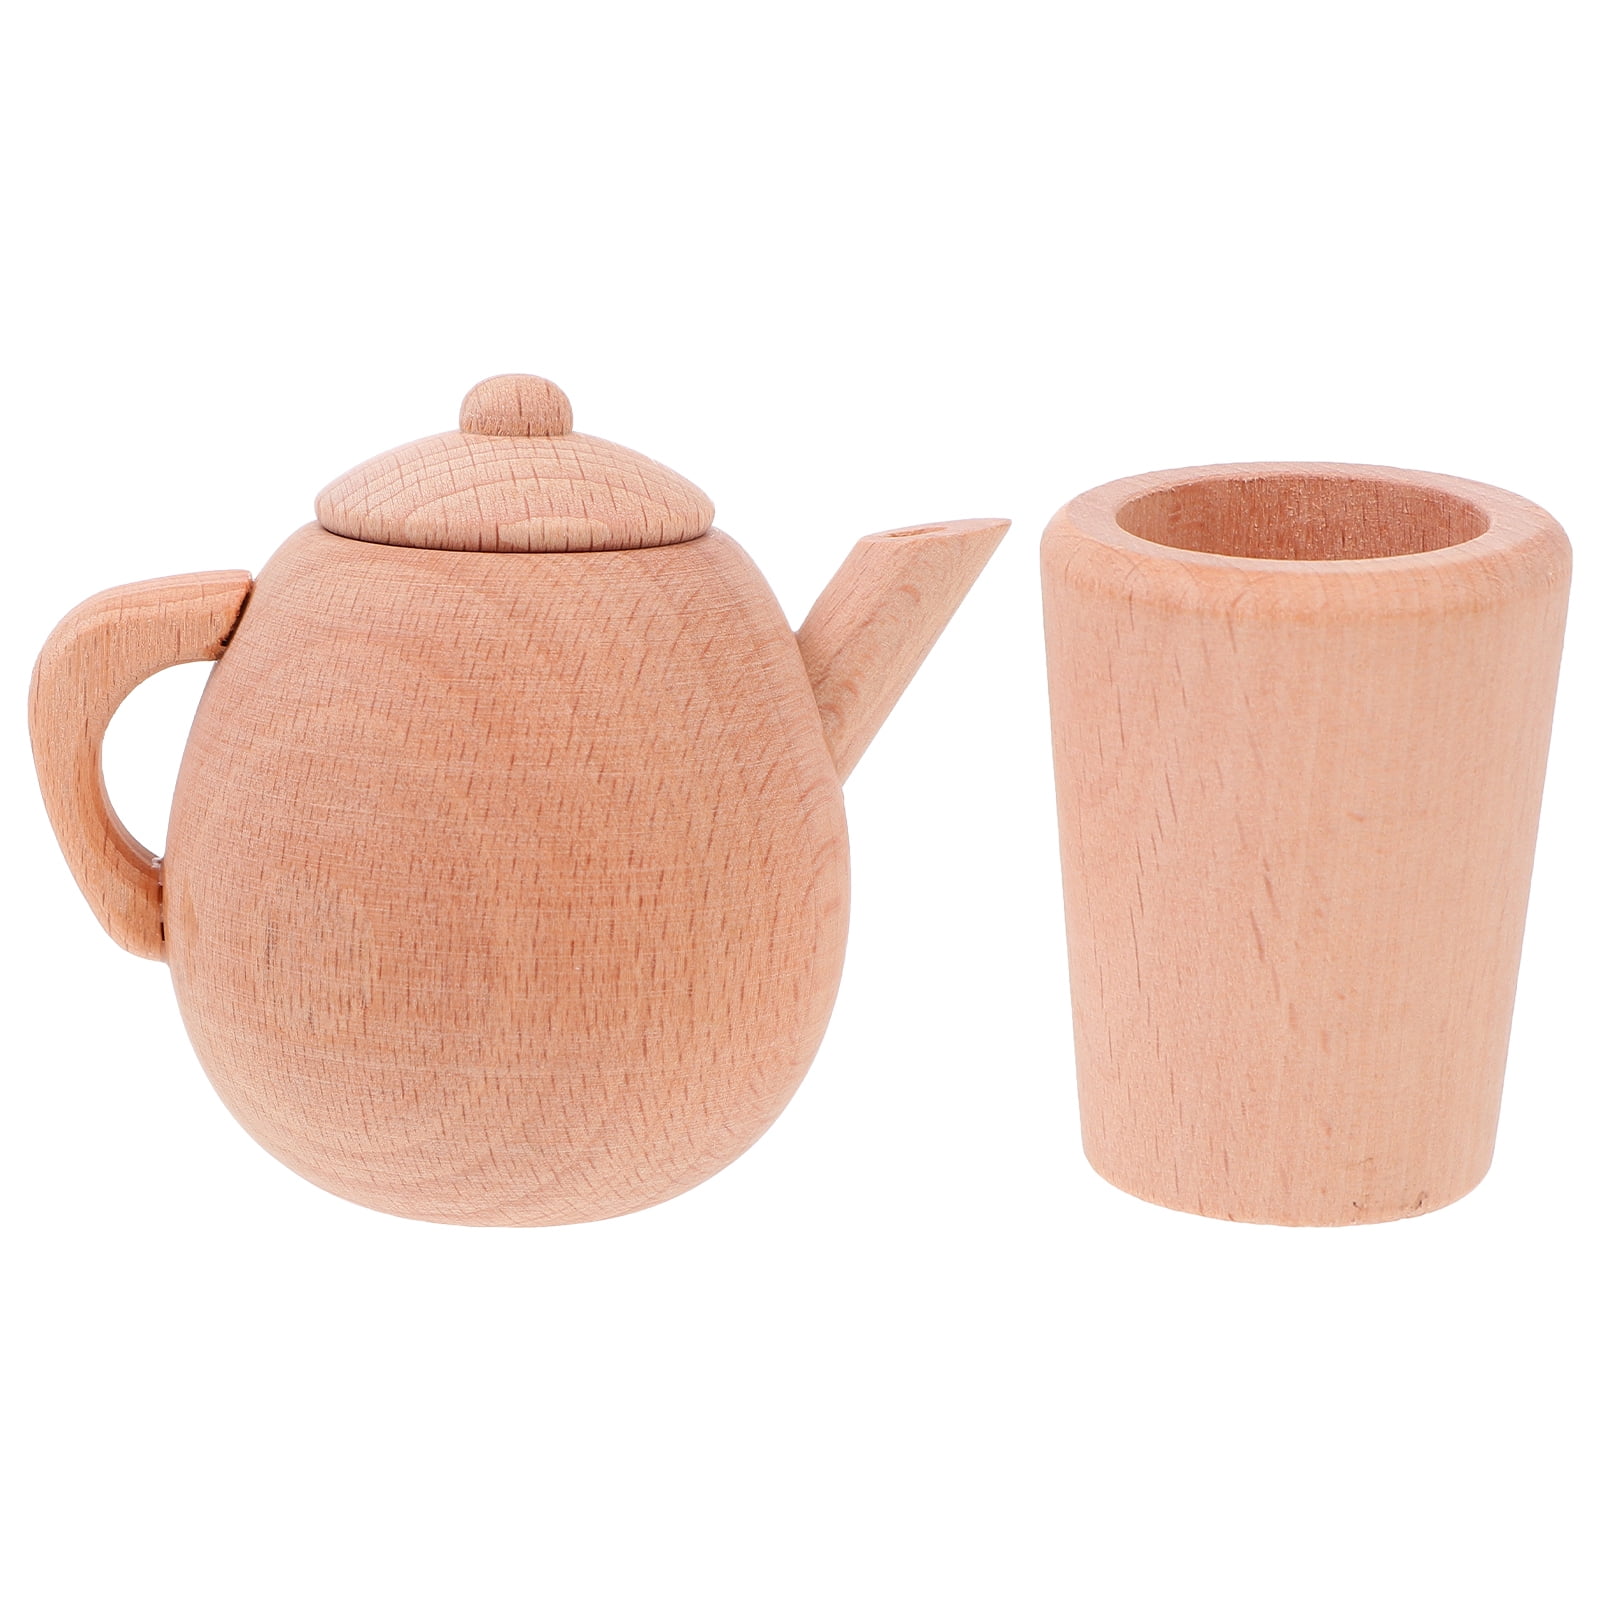 Wooden Educational Pretend Play Toy Teapot Cup Preschool Toys Game Supplies 